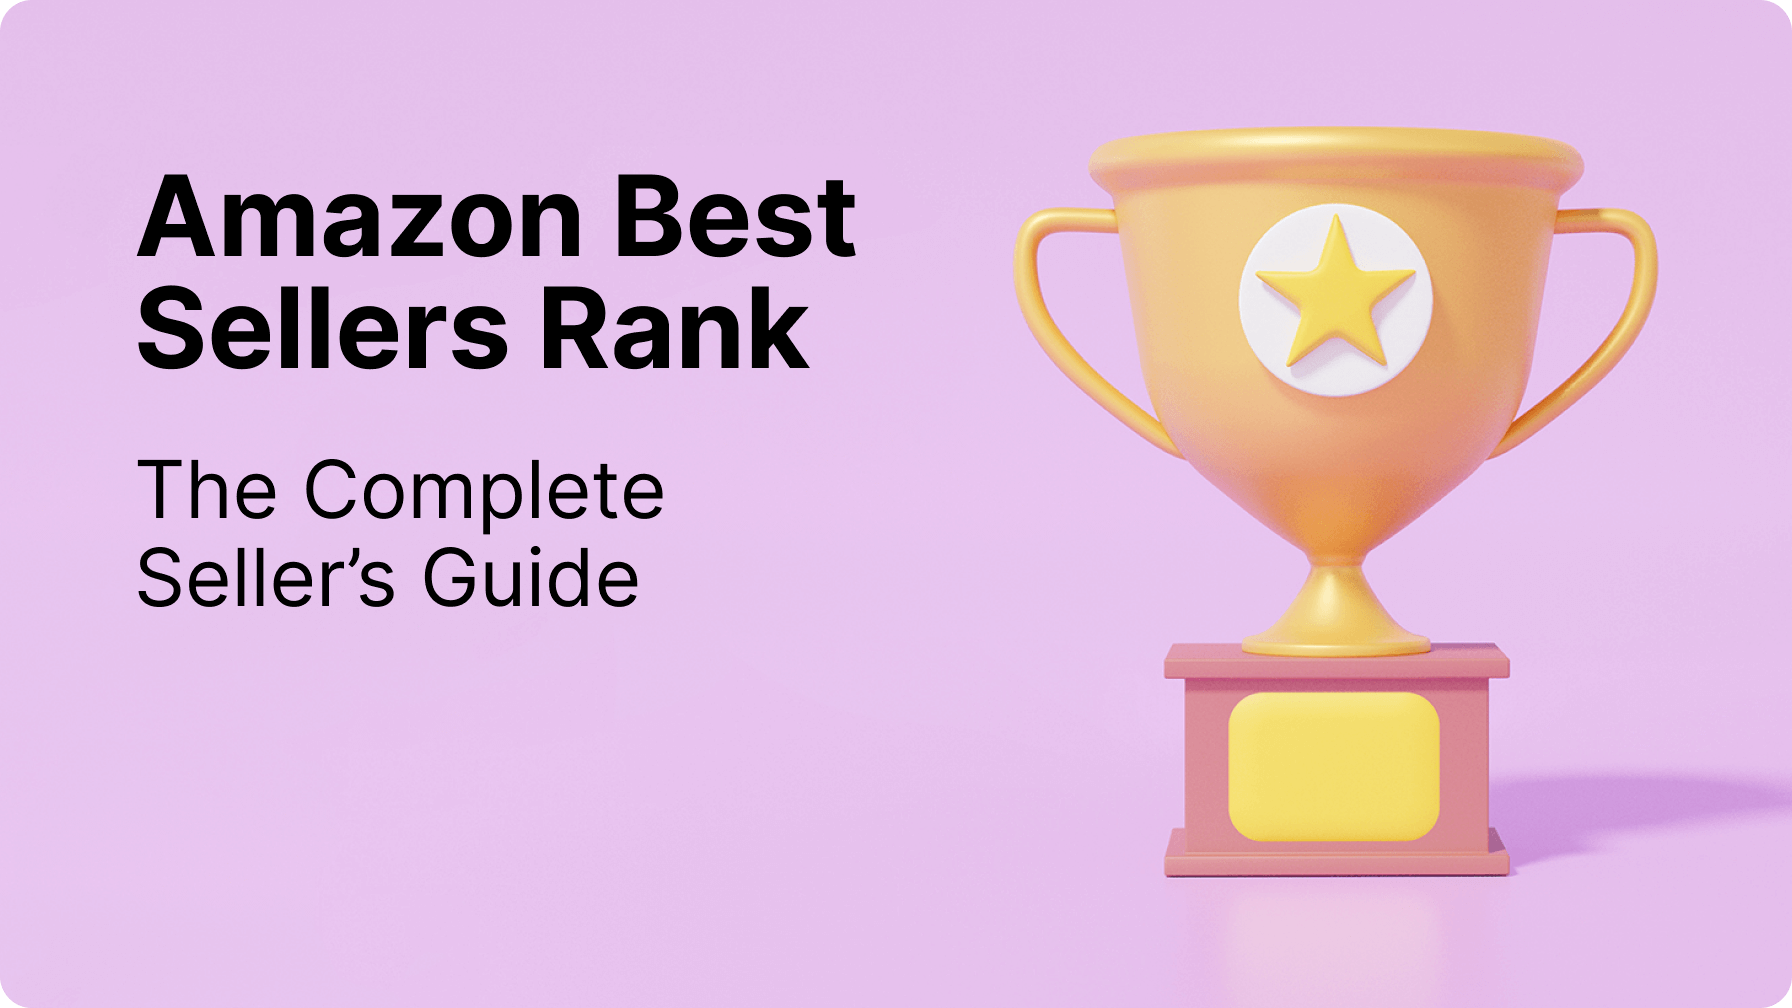 Amazon Best Sellers Rank - The Complete Seller's Guide